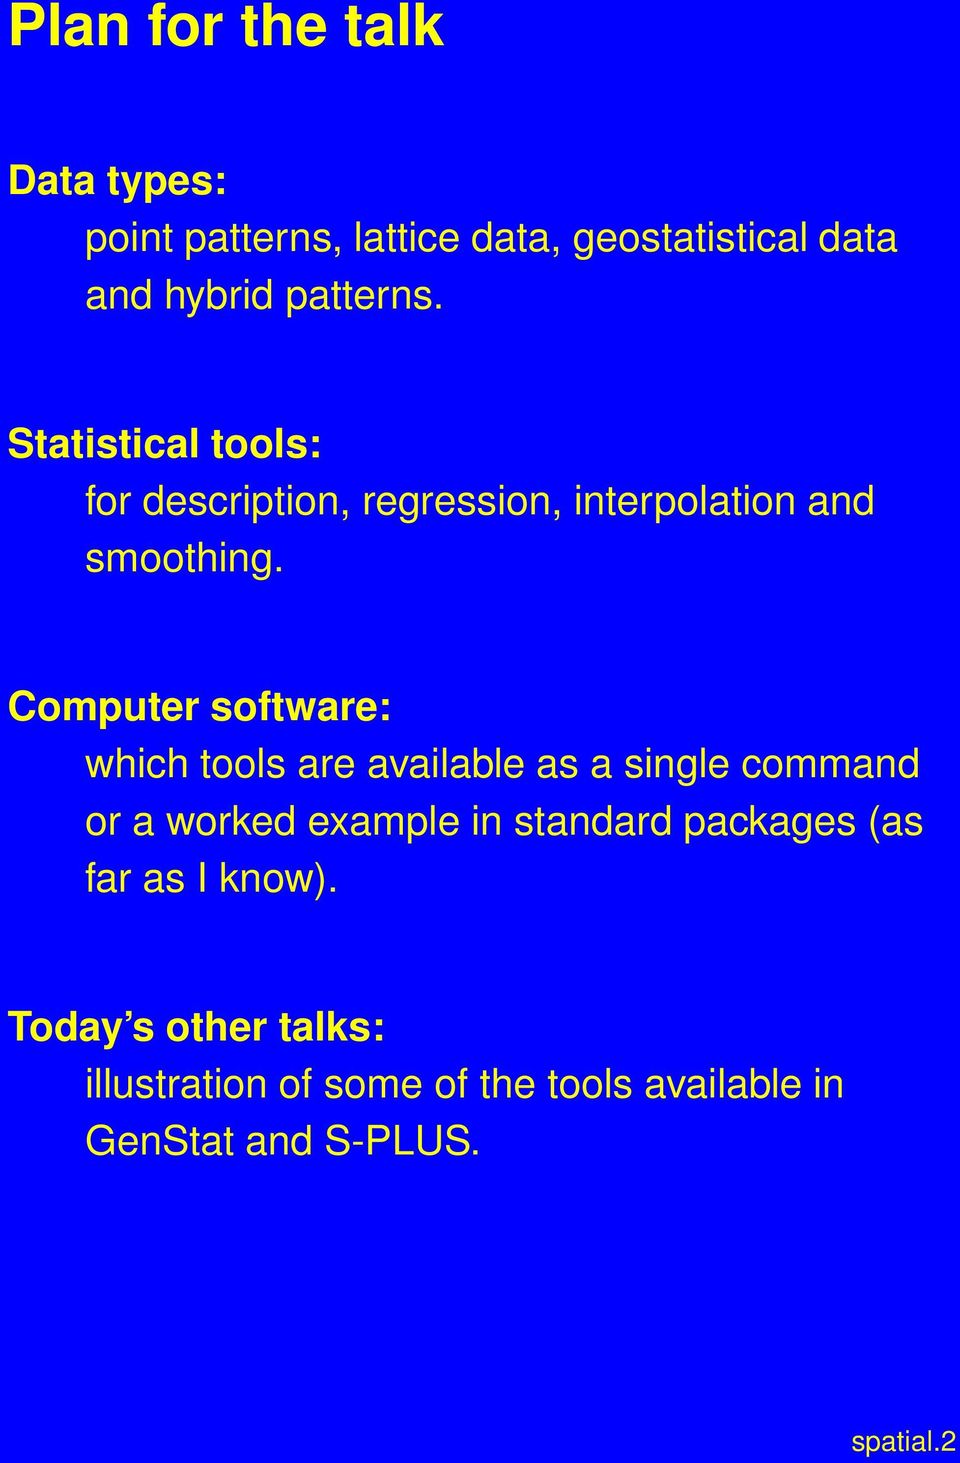 Computer software: which tools are available as a single command or a worked example in standard